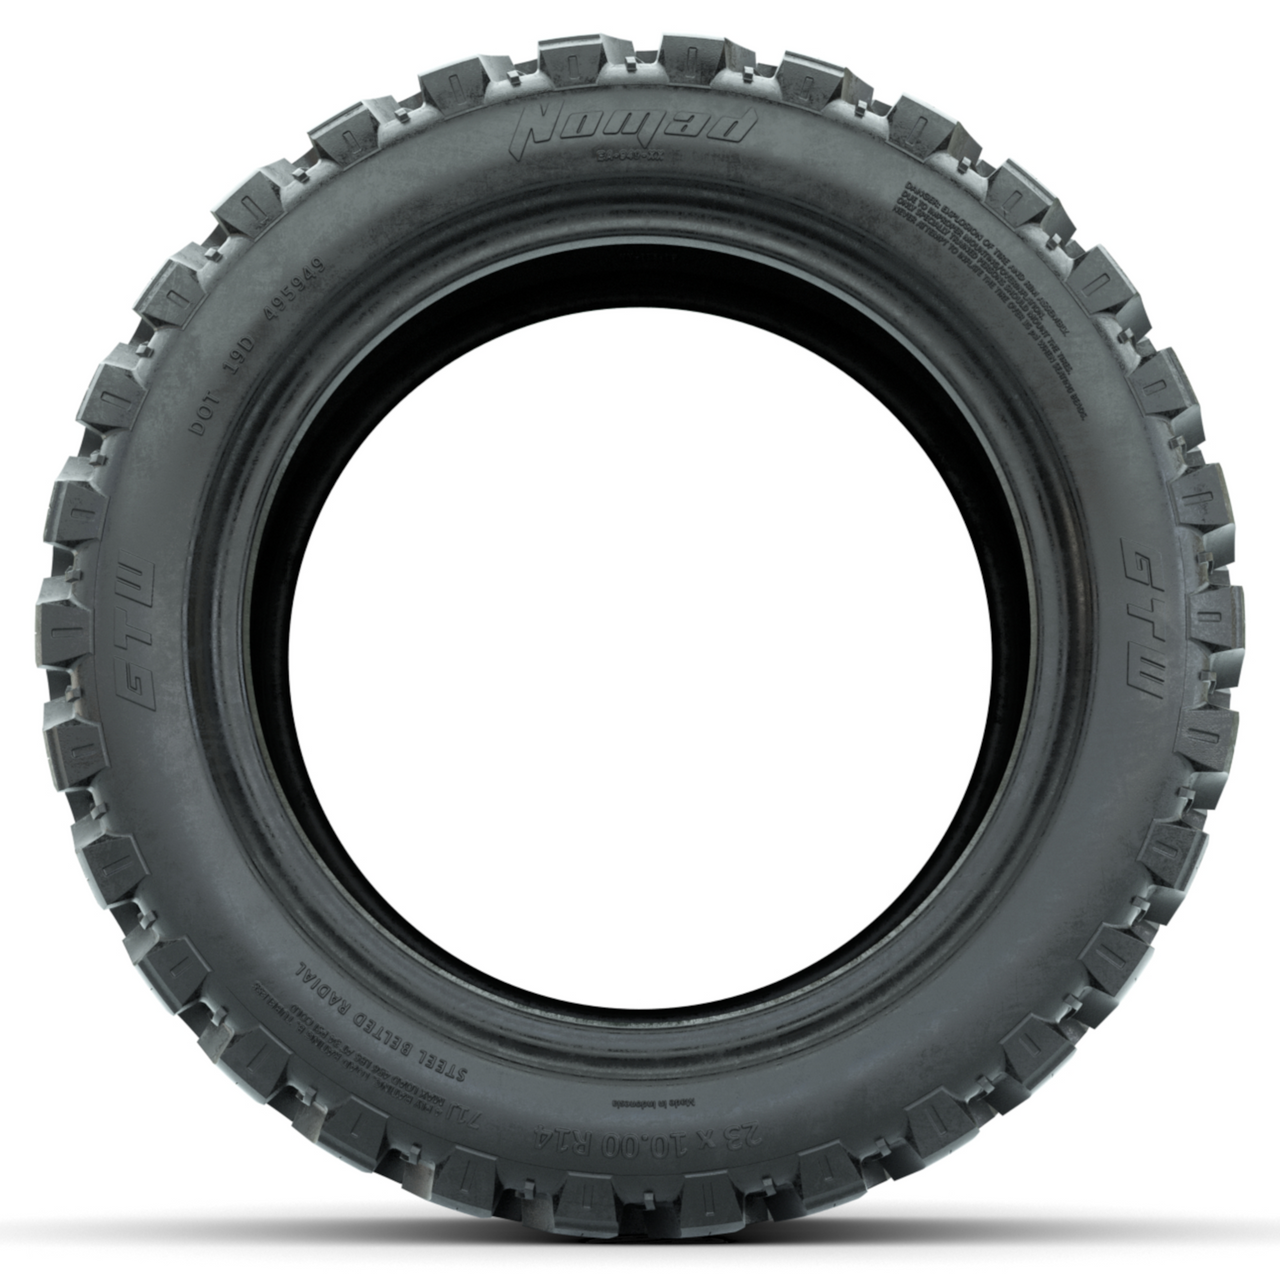 23x10-R14 GTW® Nomad Steel Belted Radial All Terrain Tire
Item # 20-064